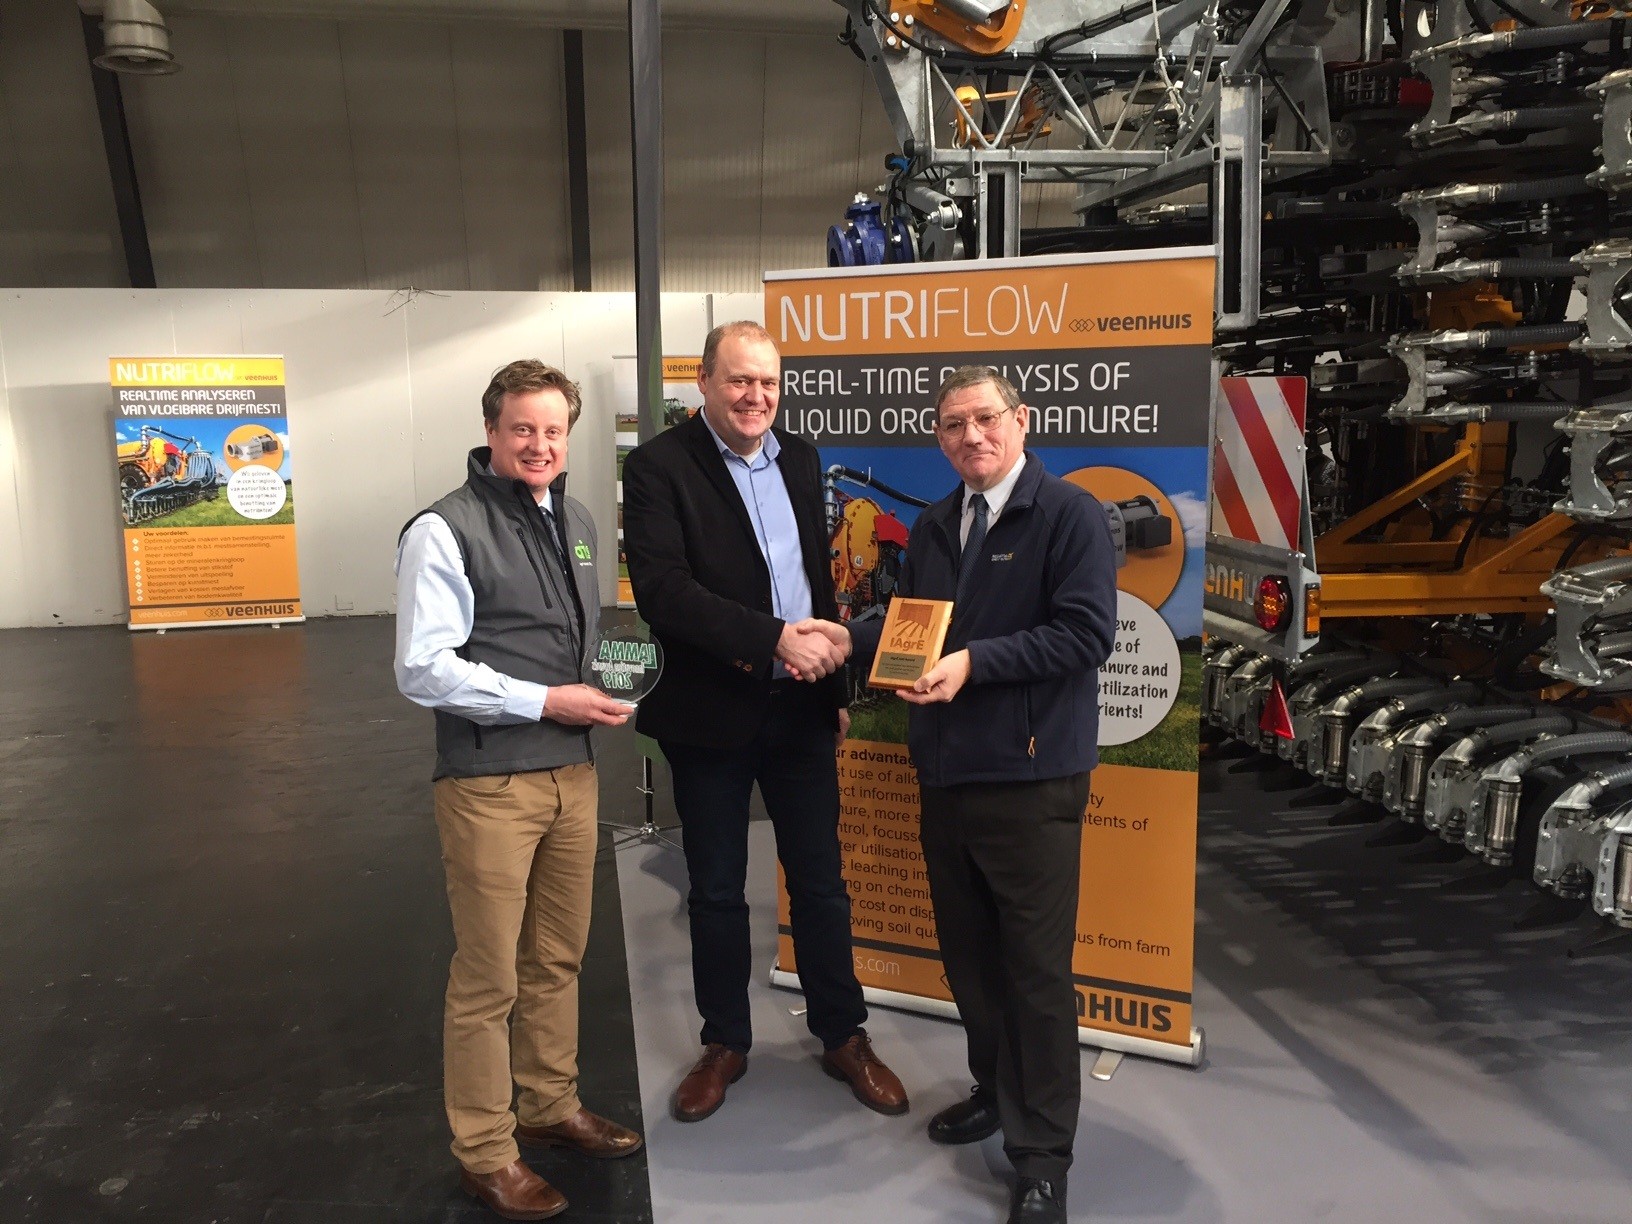 Veenhuis Nutri-Flow slurry analysis wins the IAgrE Ivel award for Innovation 